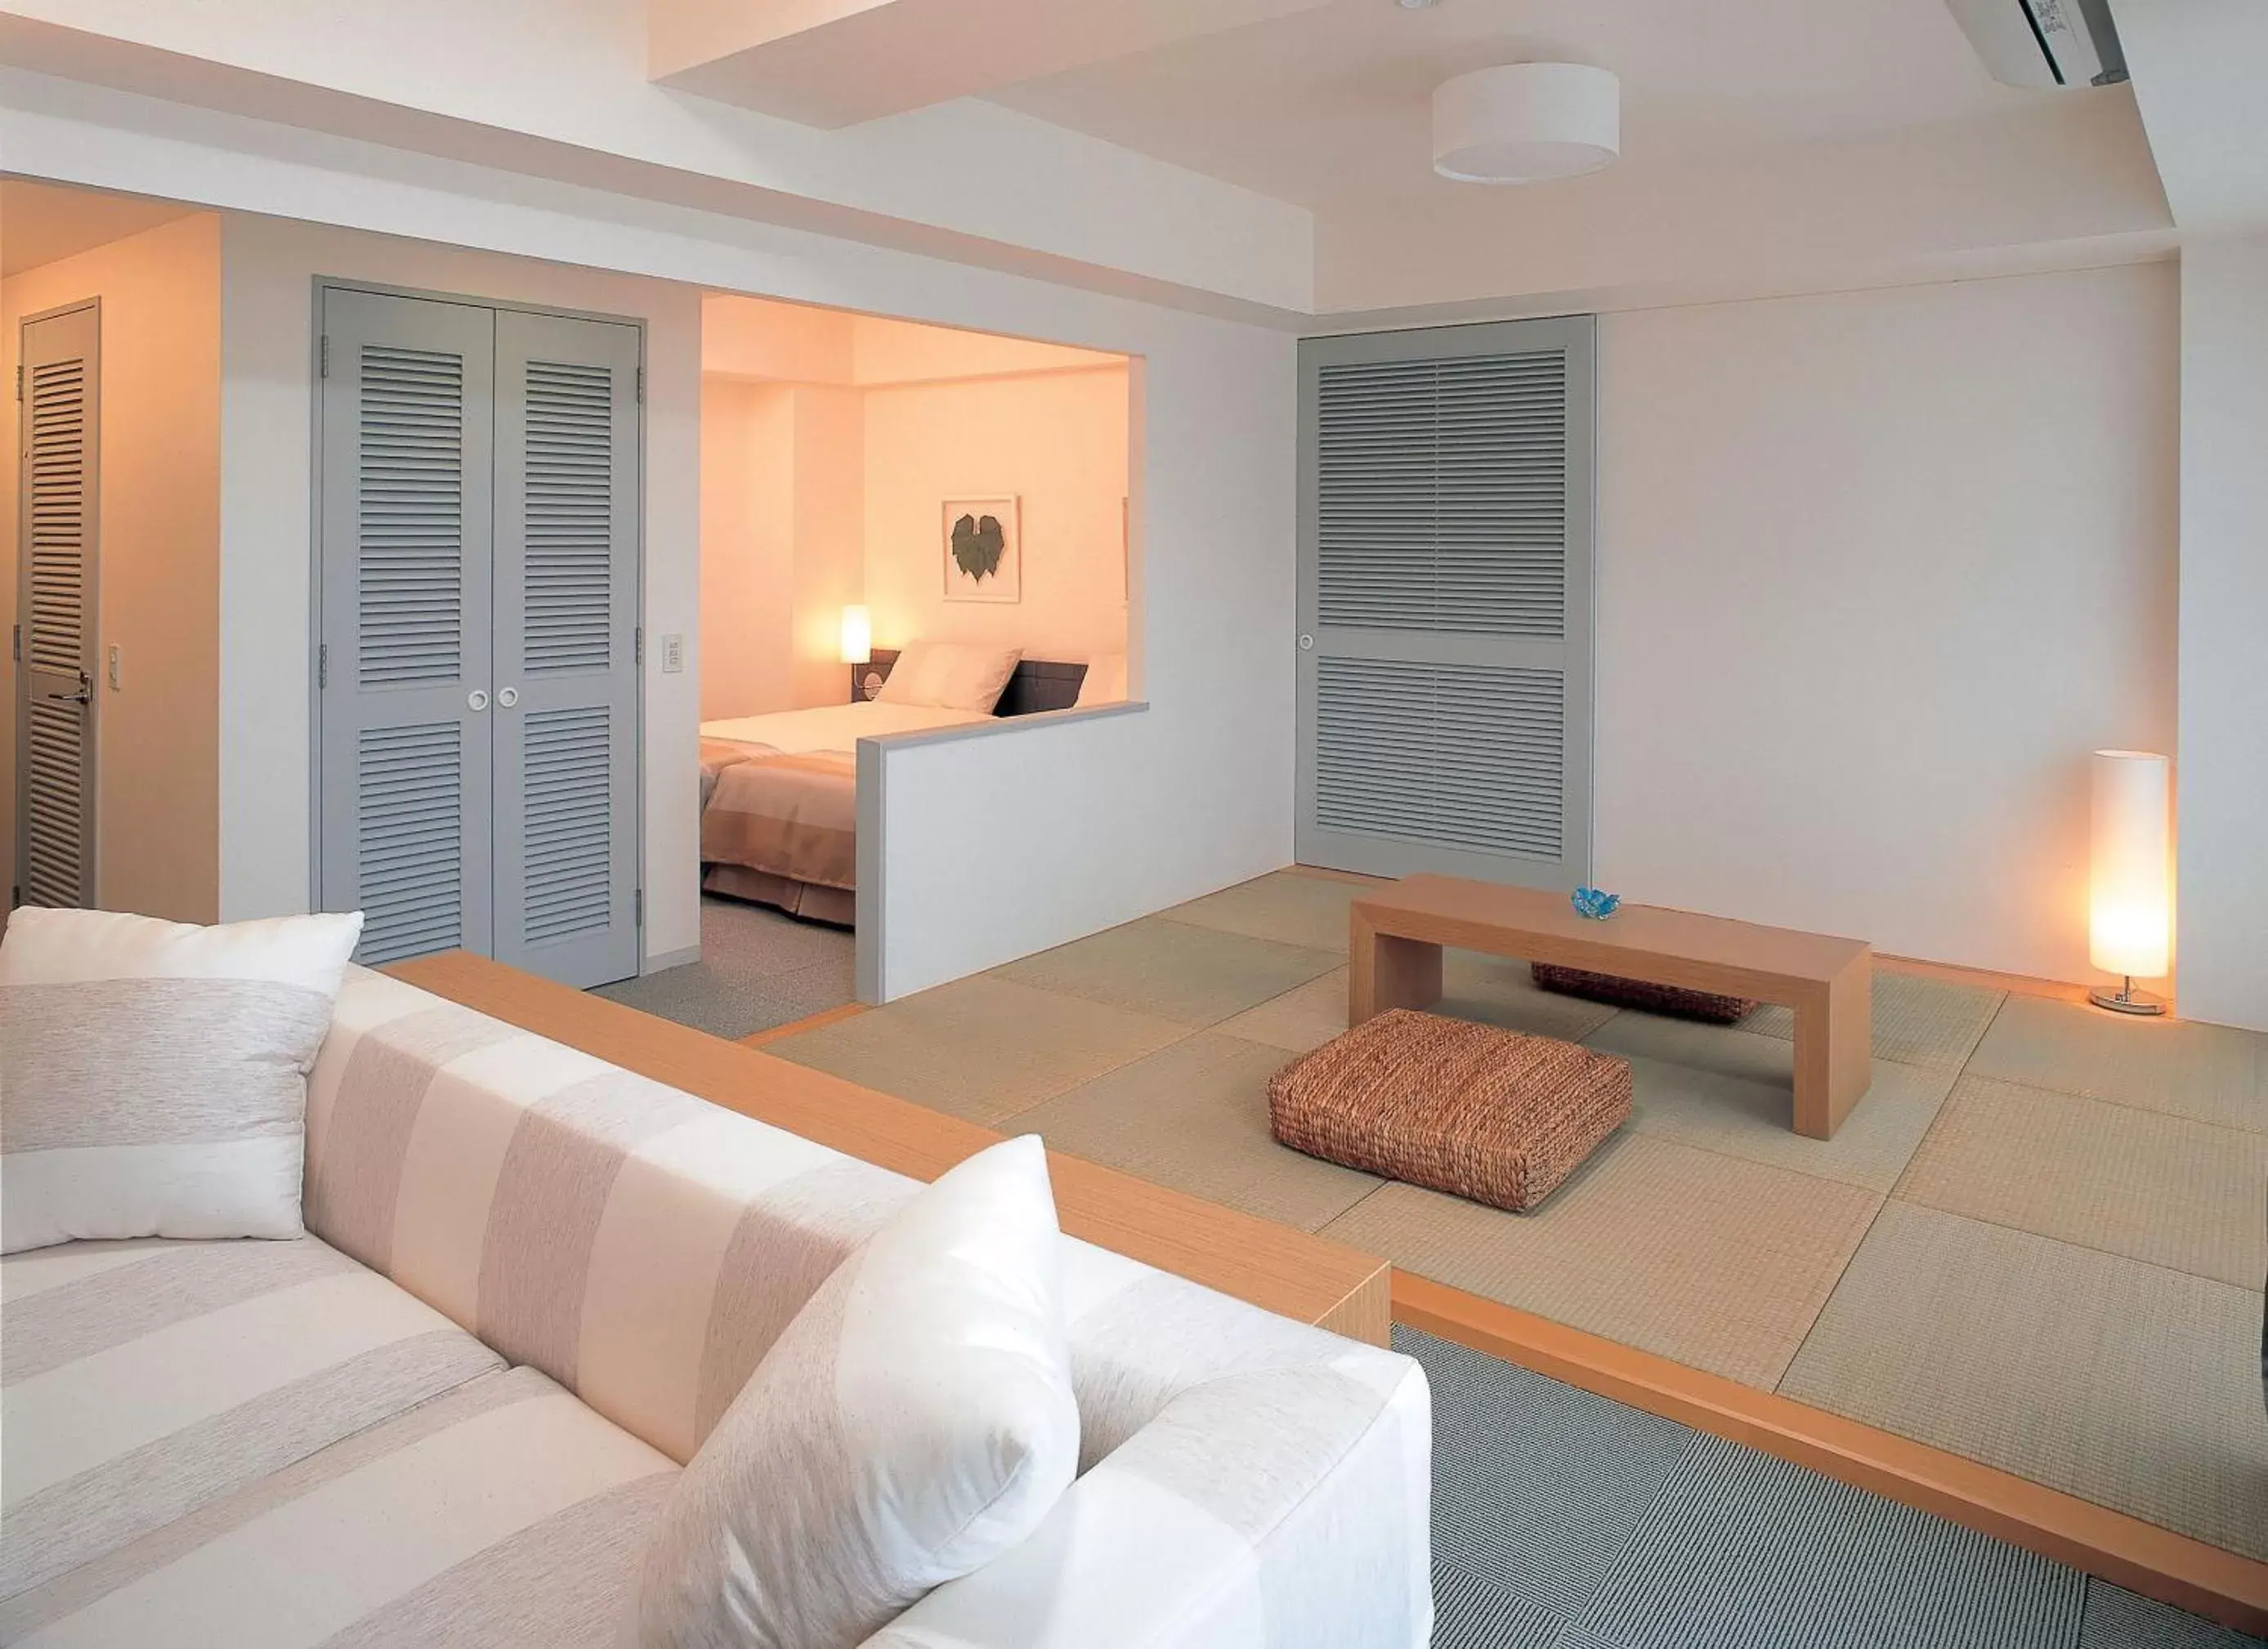 Standard Family Room in The Beach Tower Okinawa Hotel